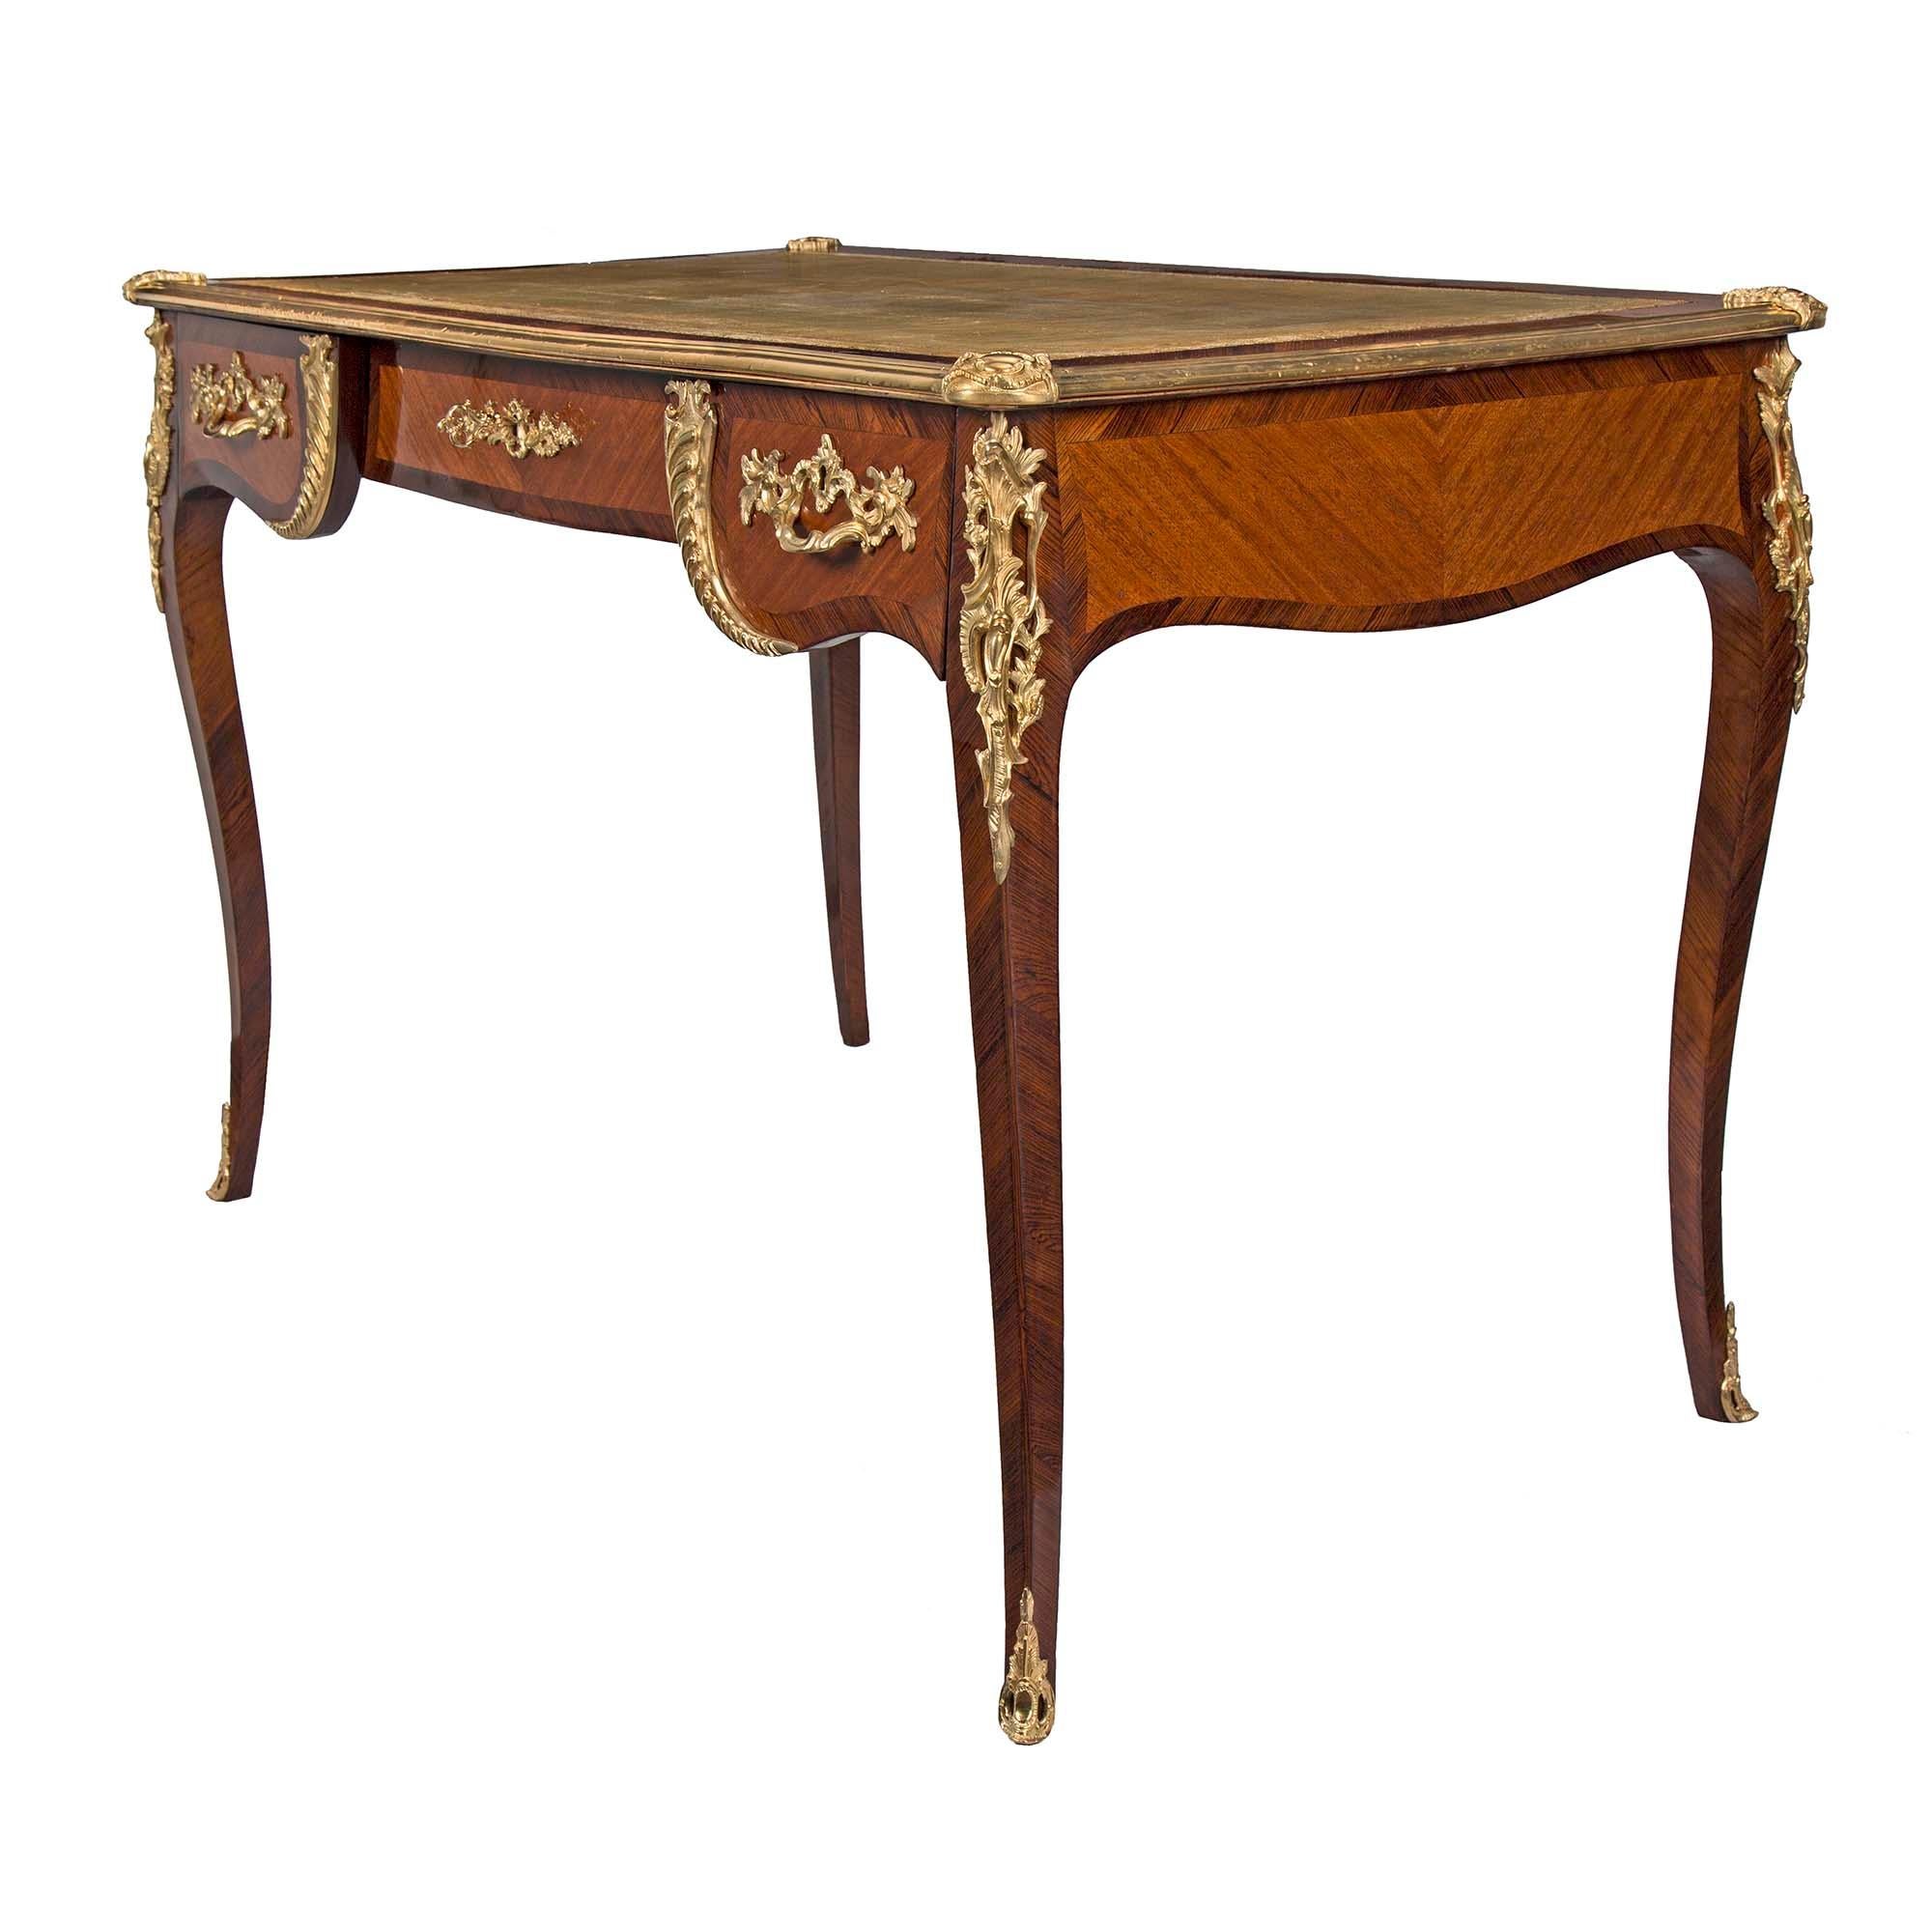 French Mid-19th Century Louis XV Style Tulipwood and Kingwood Bureau Plat In Good Condition For Sale In West Palm Beach, FL